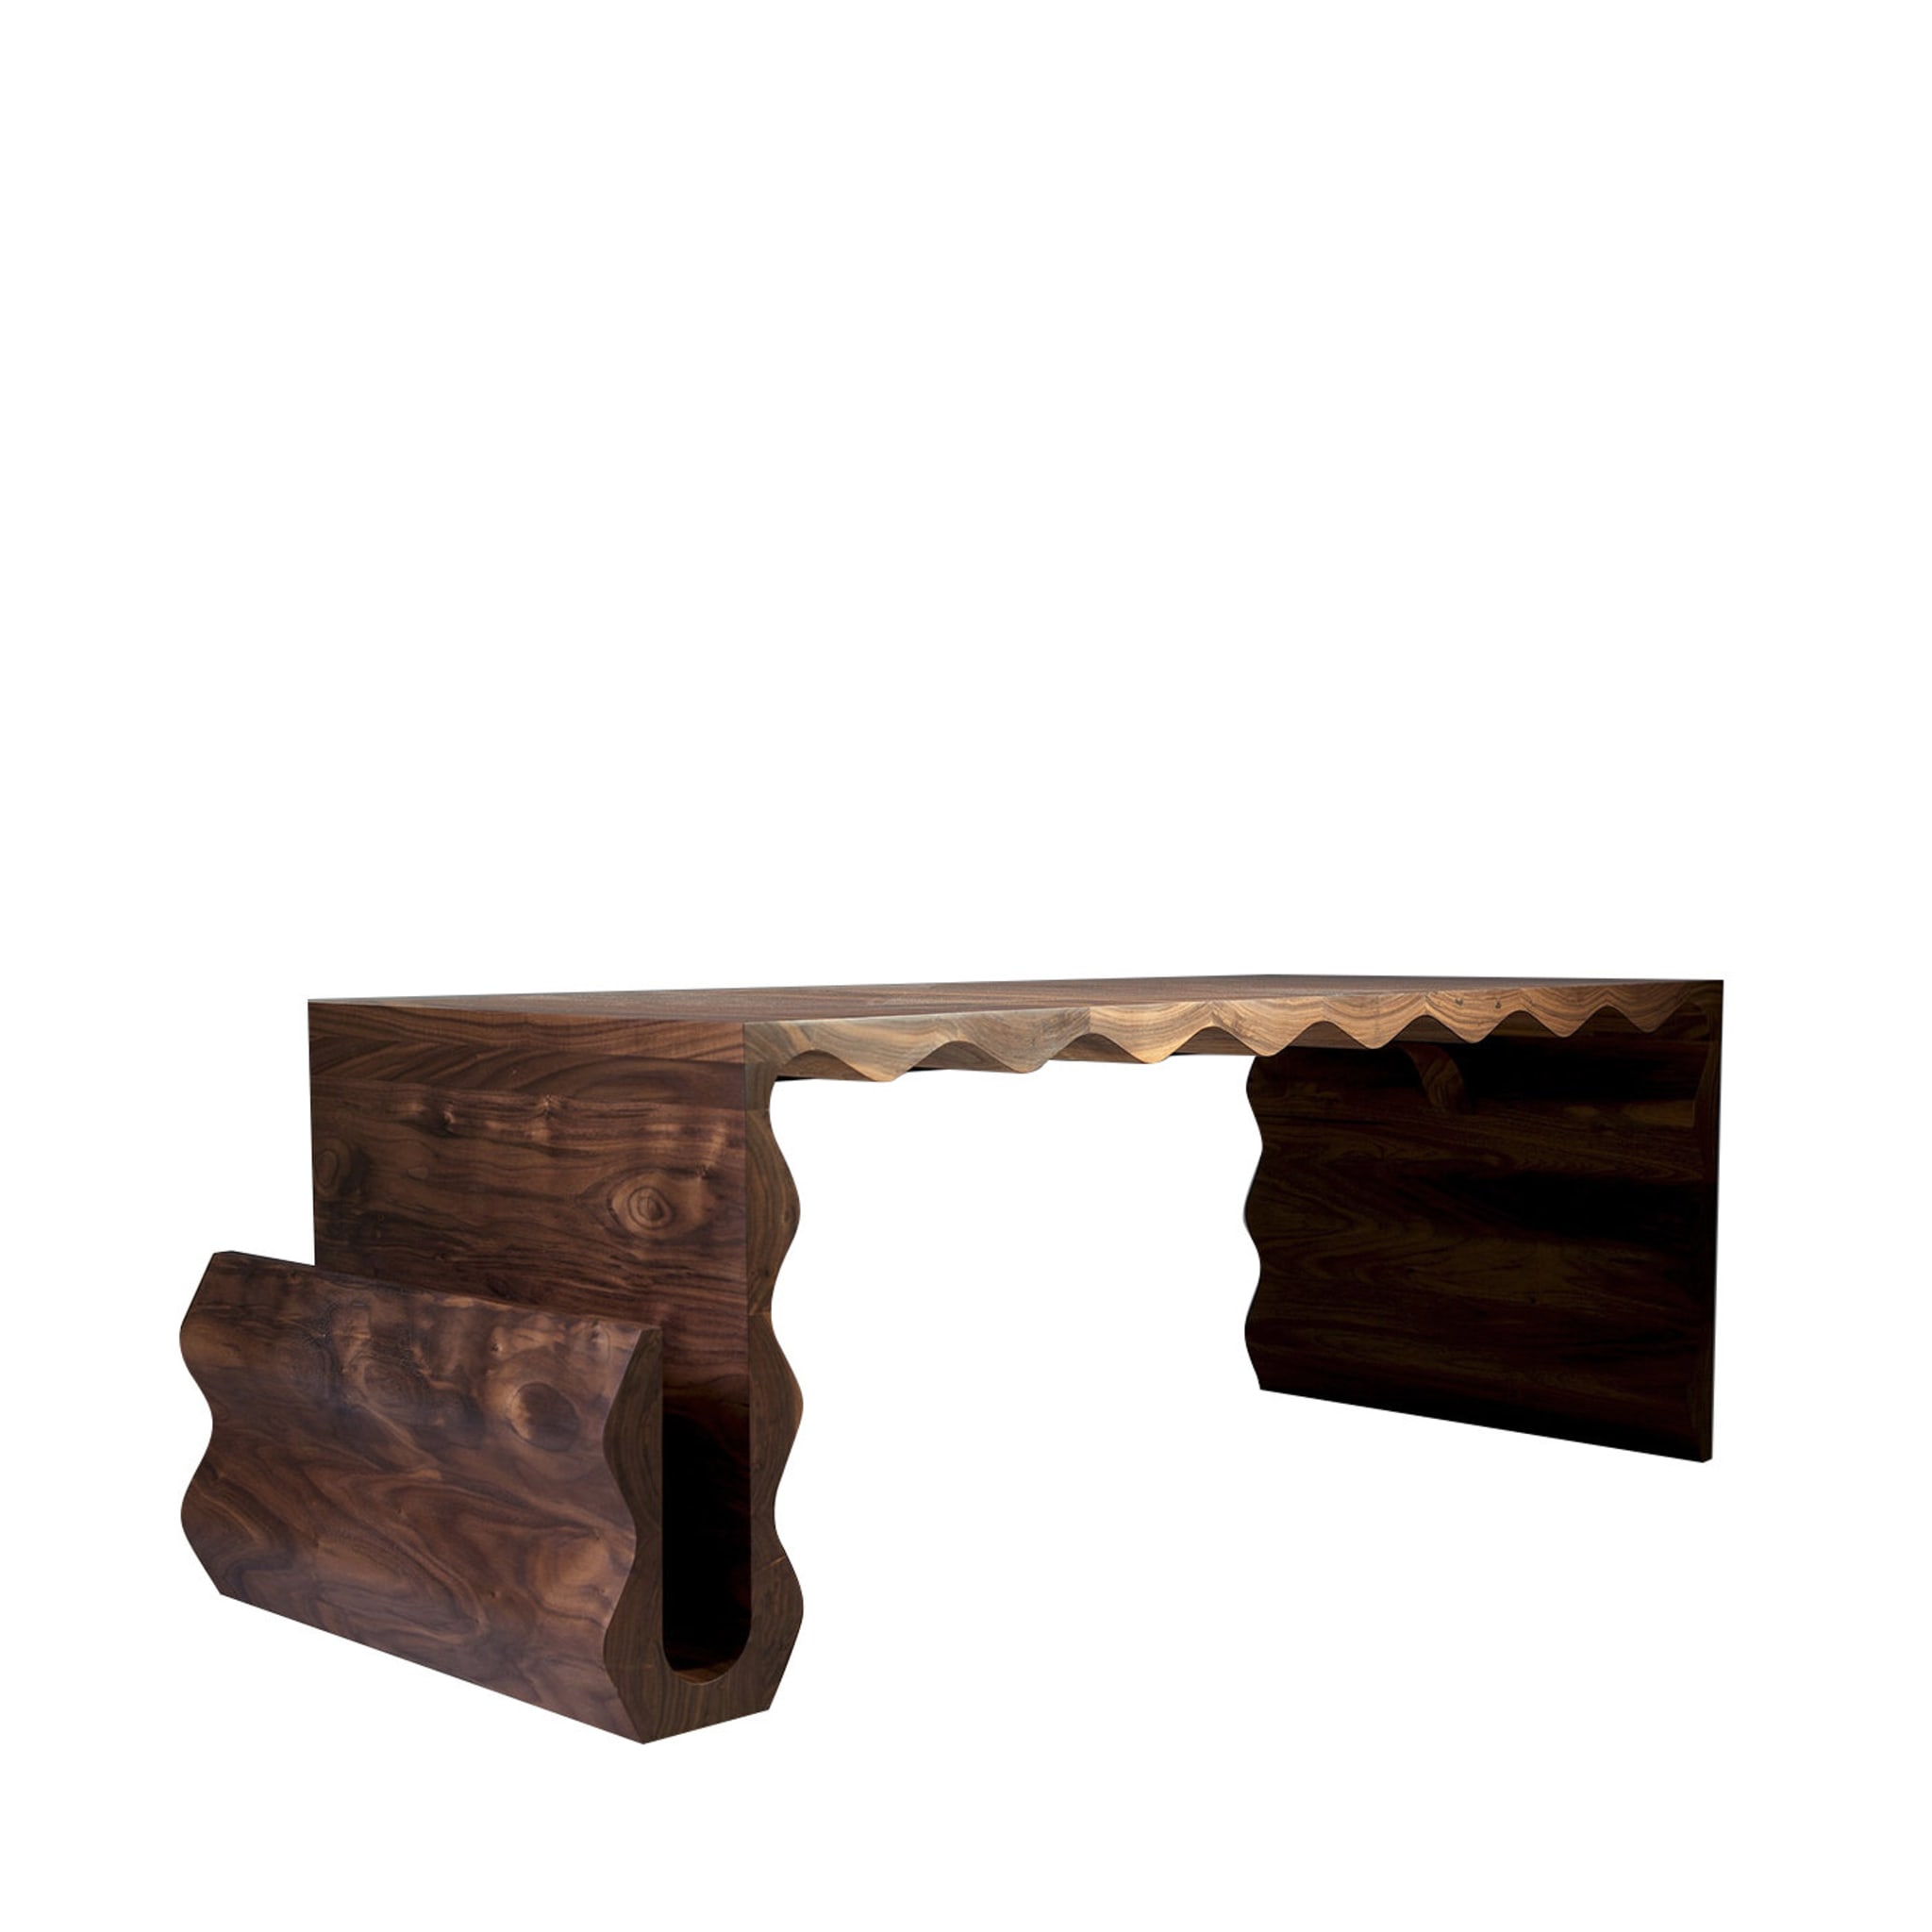 Optable Wood Coffee table by Mauro Dell'Orco - Main view